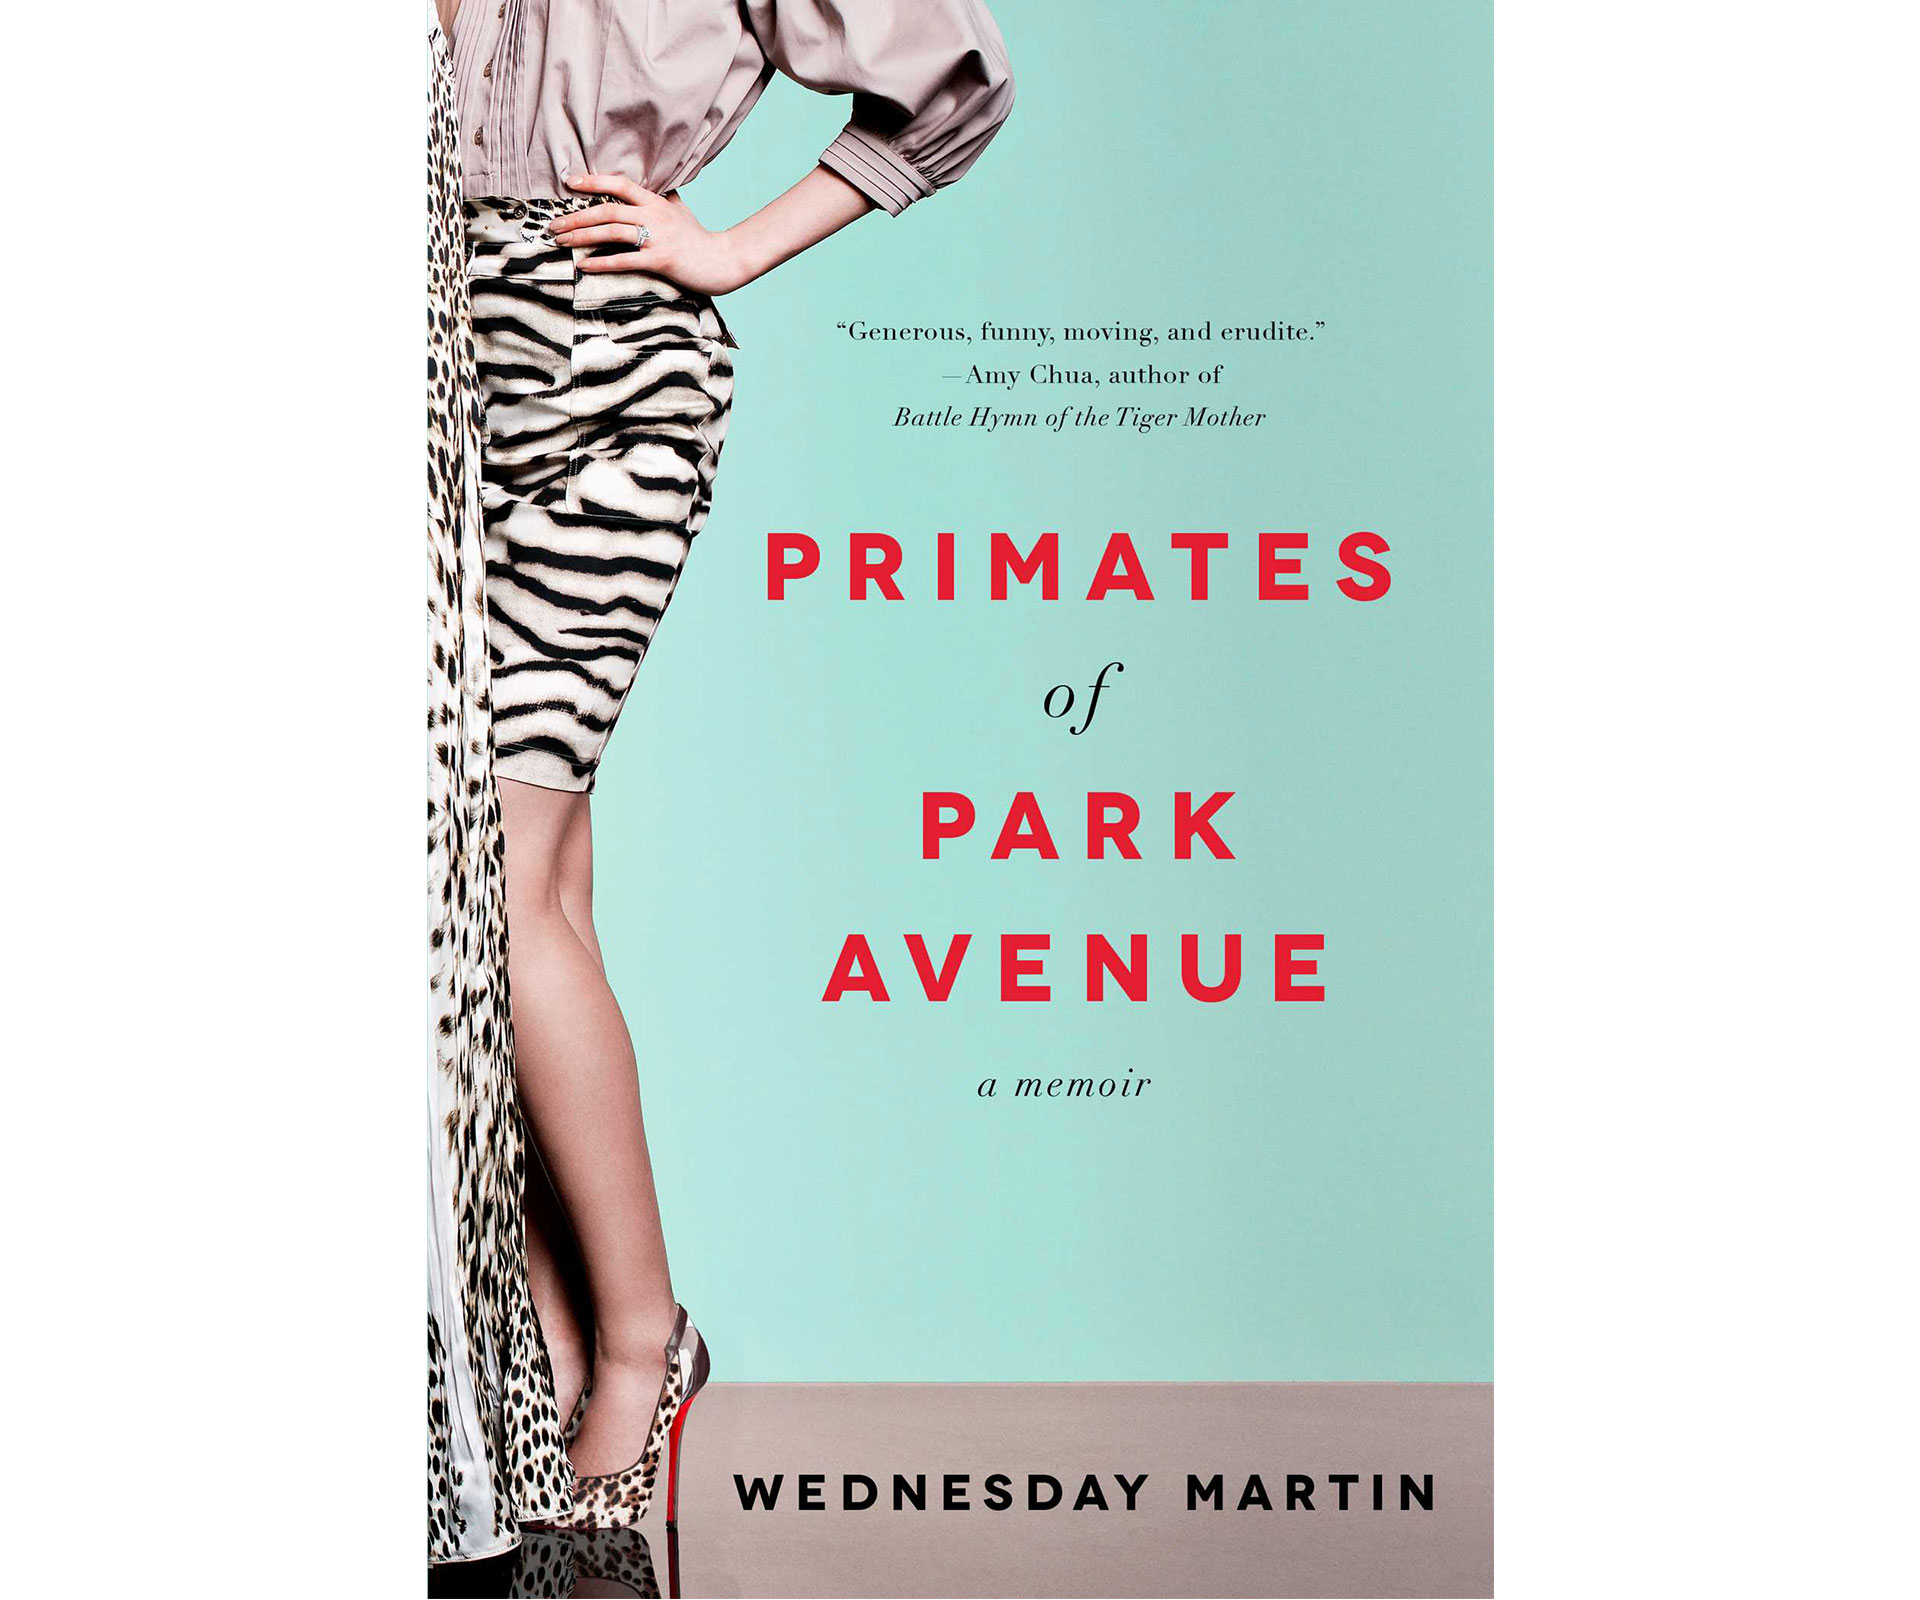 Primates of Park avenue by Wednesday Martin, book of the month.